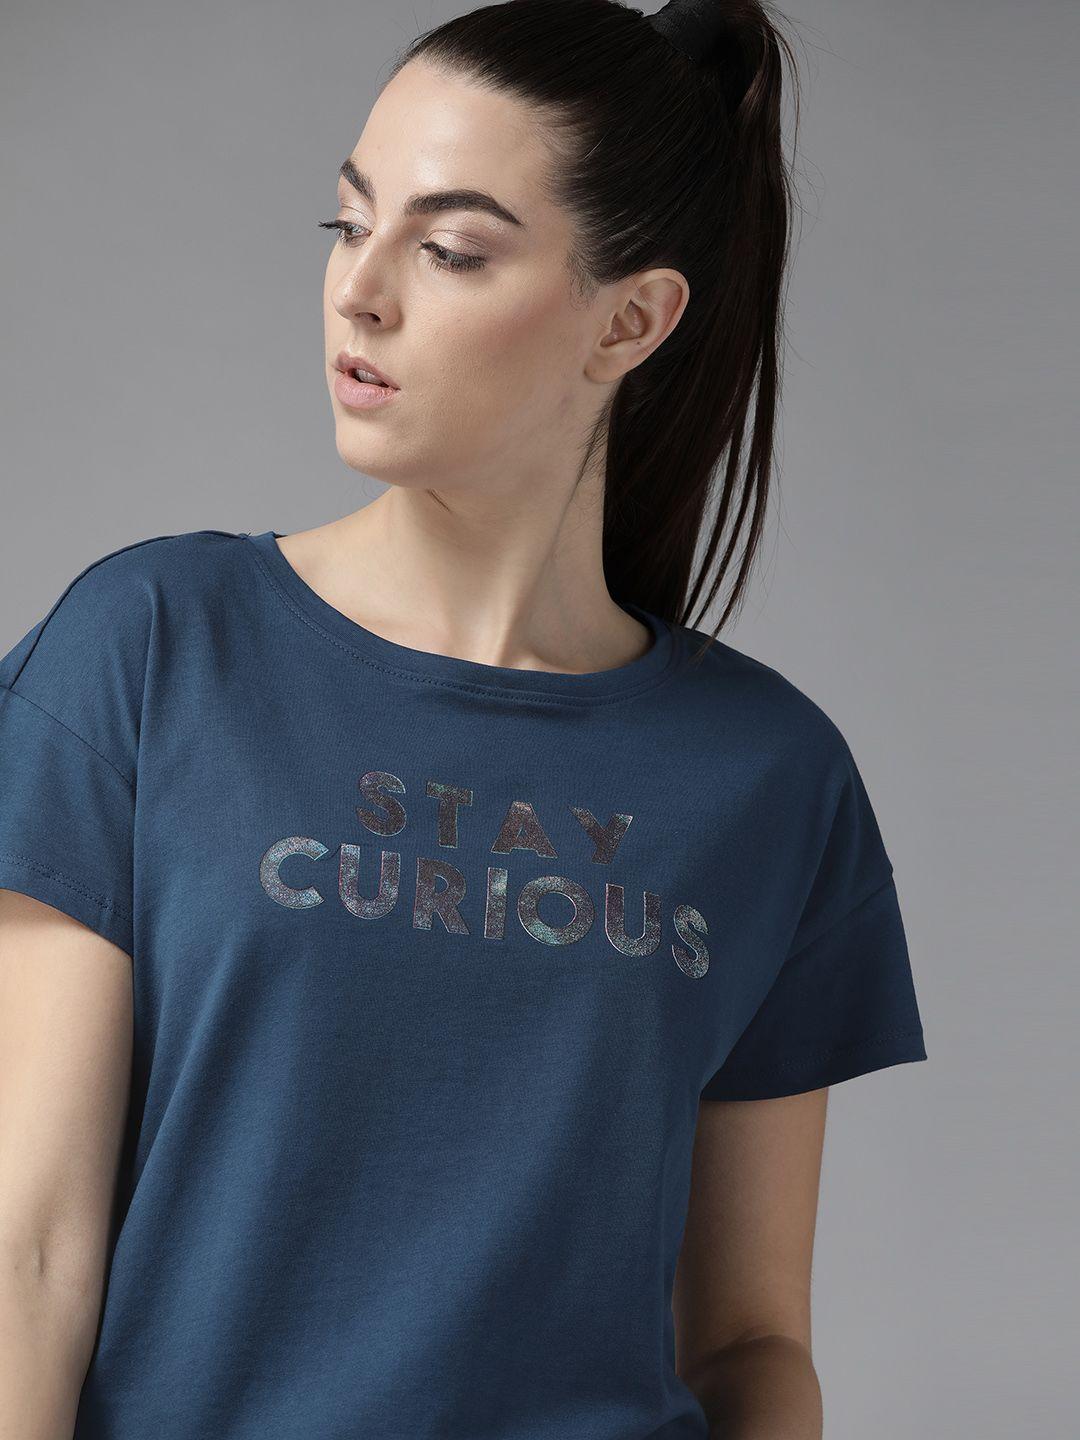 the-roadster-lifestyle-co-women-teal-blue-pure-cotton-printed-round-neck-pure-cotton-t-shirt